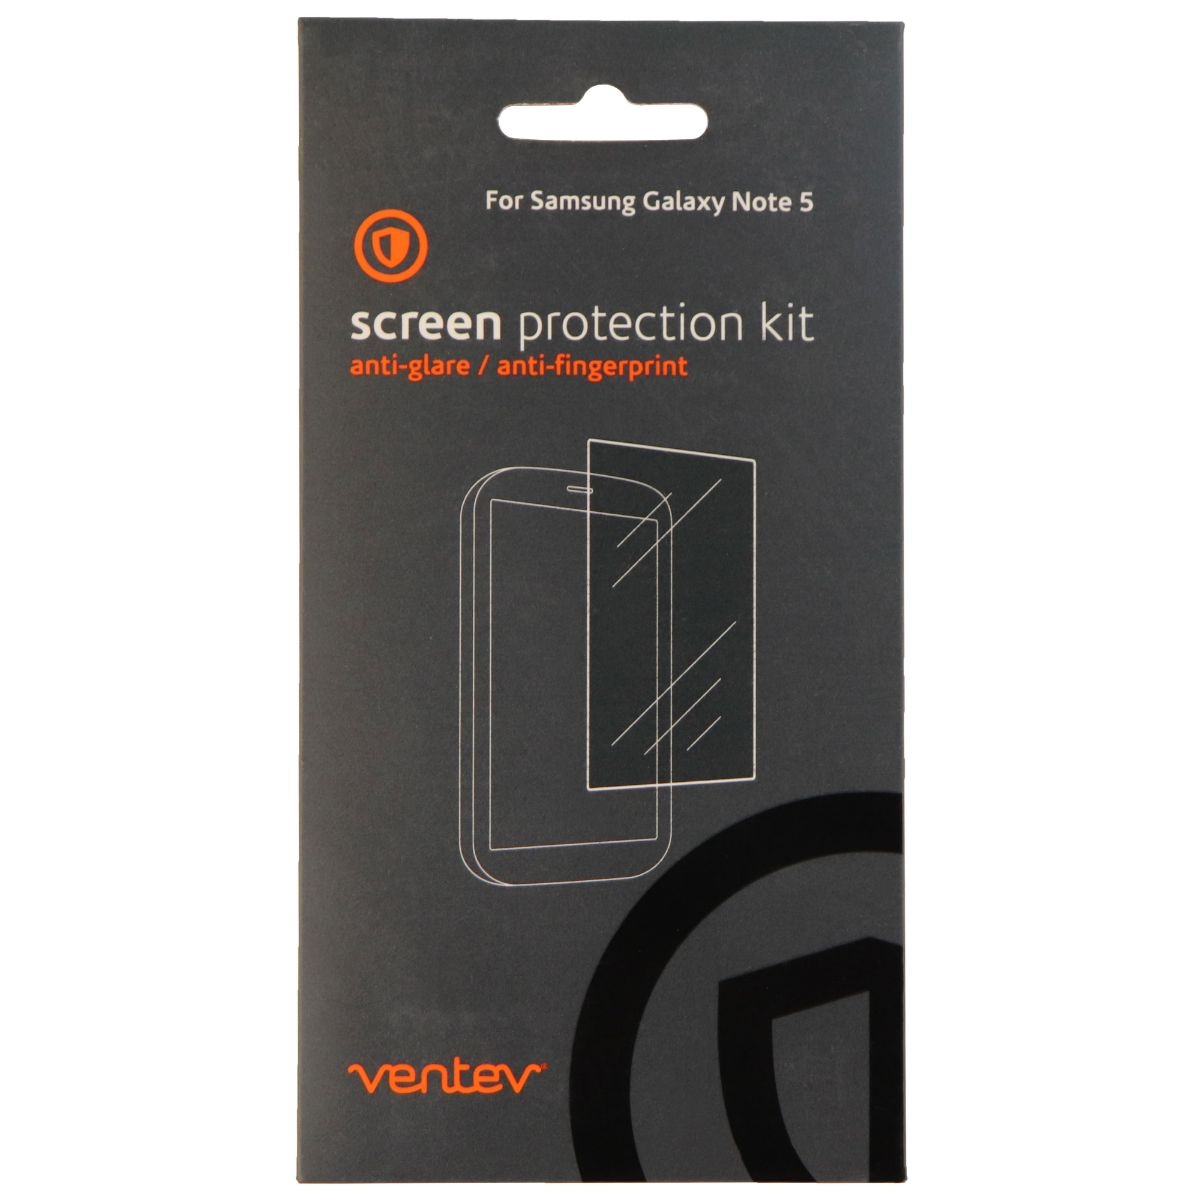 Ventev Screen Protection Kit for Samsung Galaxy Note 5 - Clear